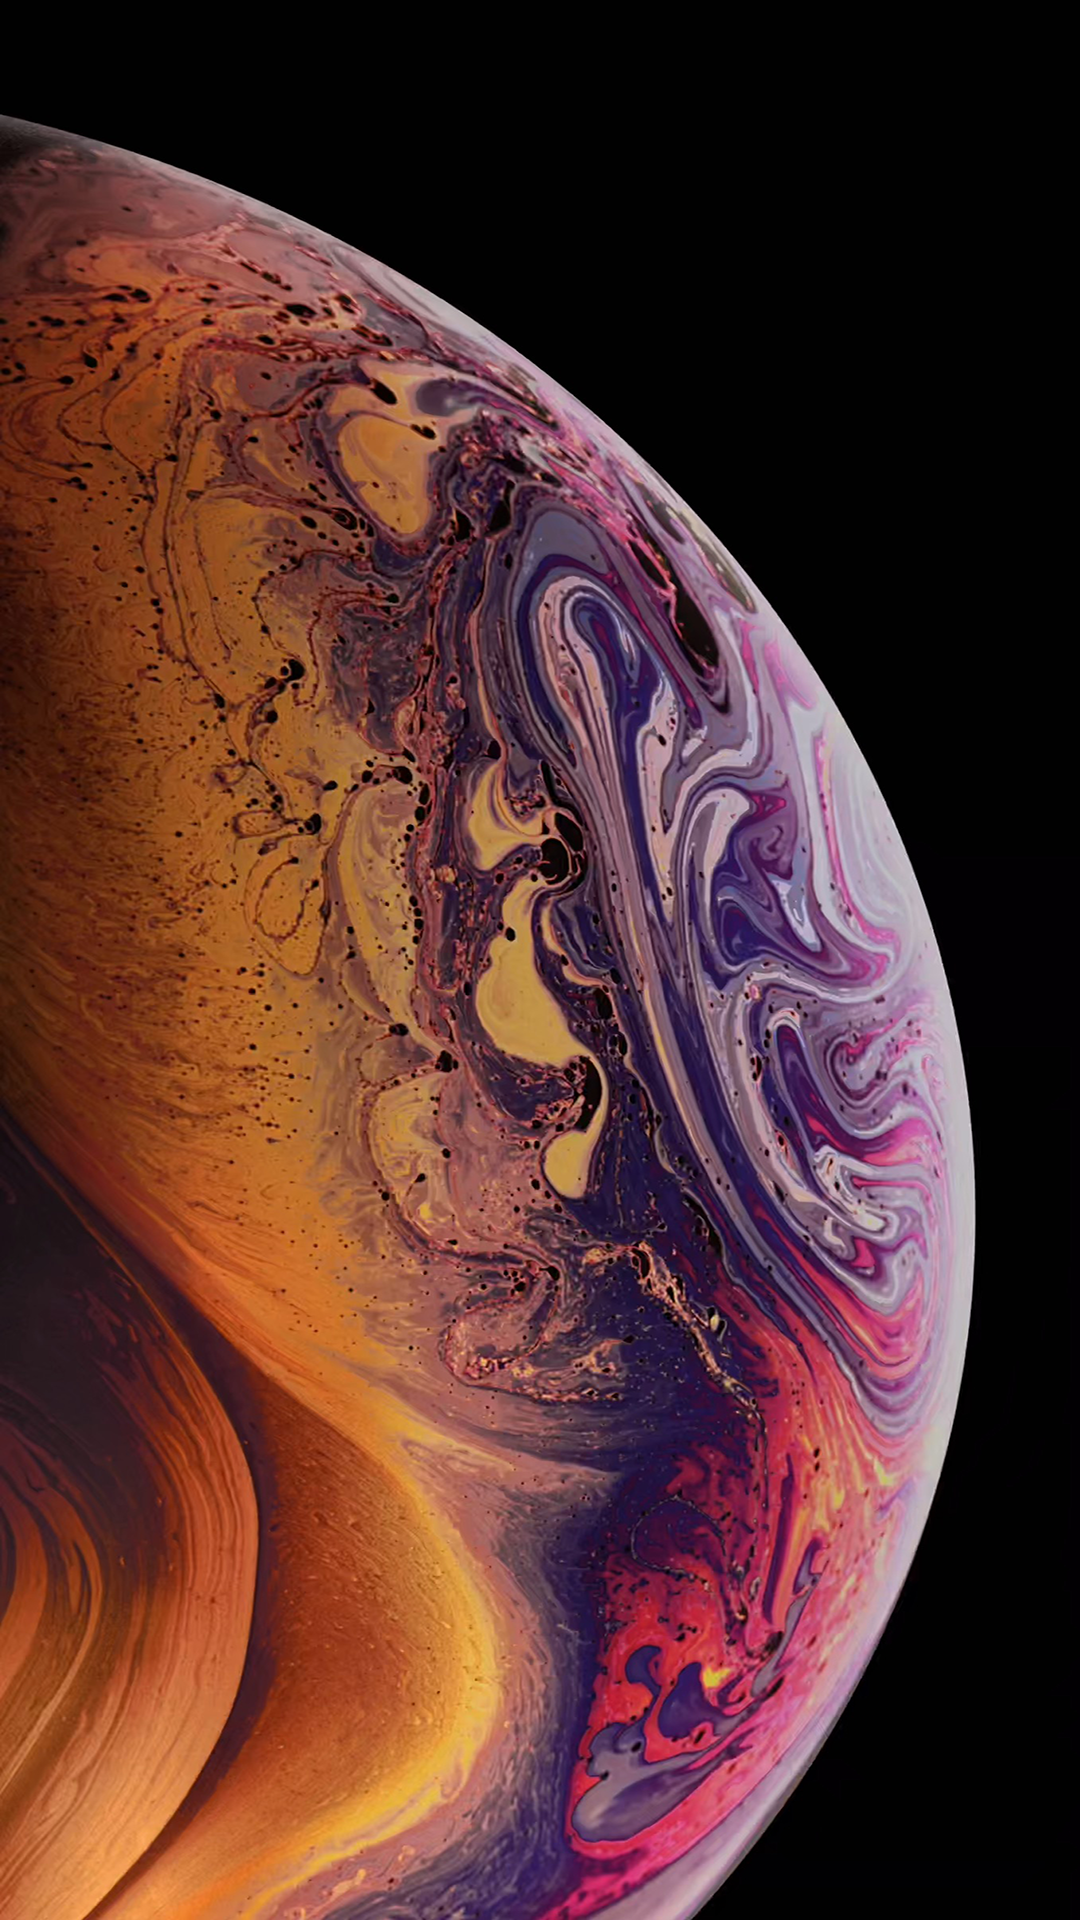 iPhone XS and iPhone XR wallpapers